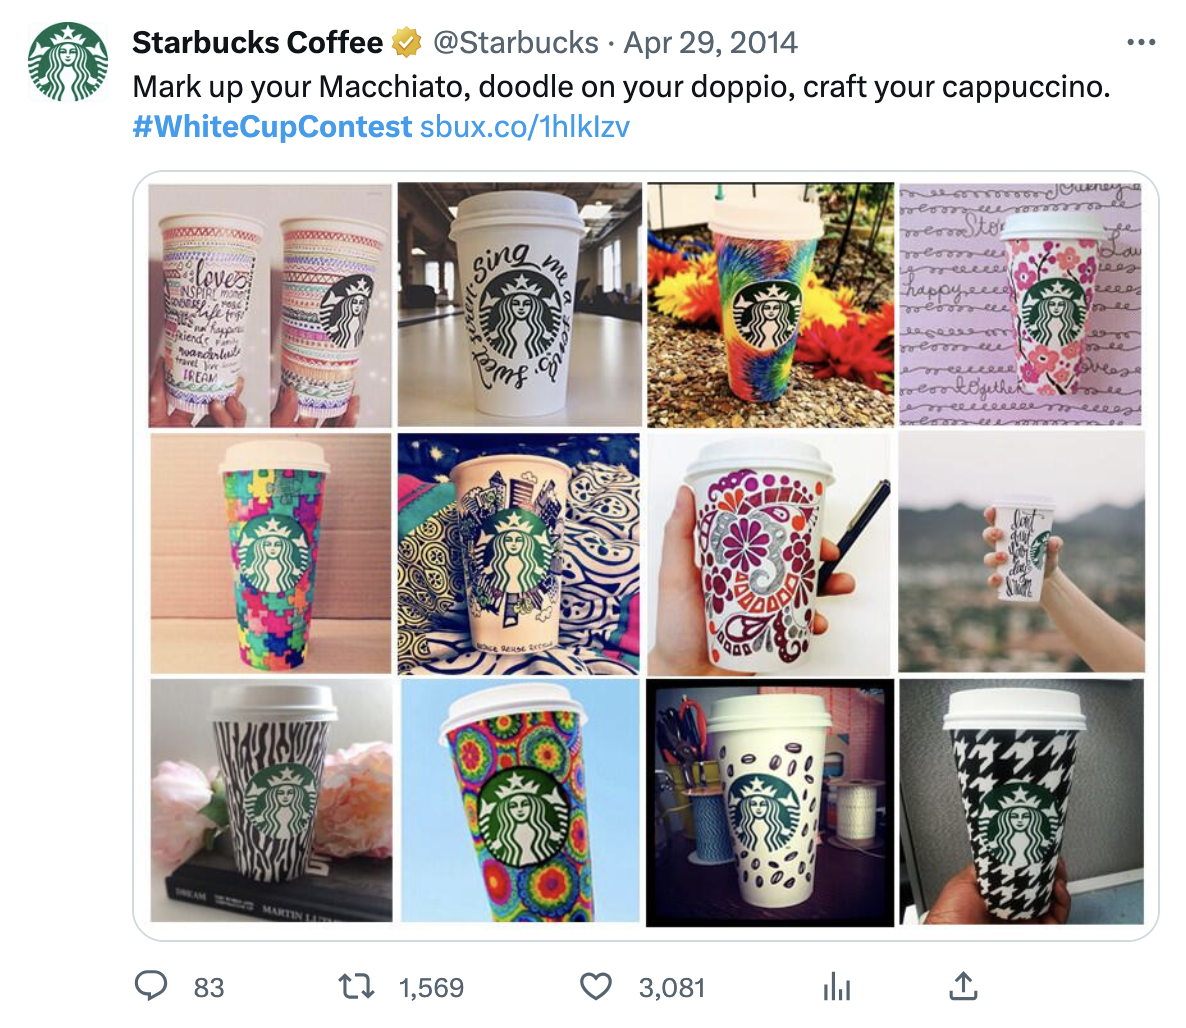 A Twitter post by Starbucks to amplify brand awareness via advocacy